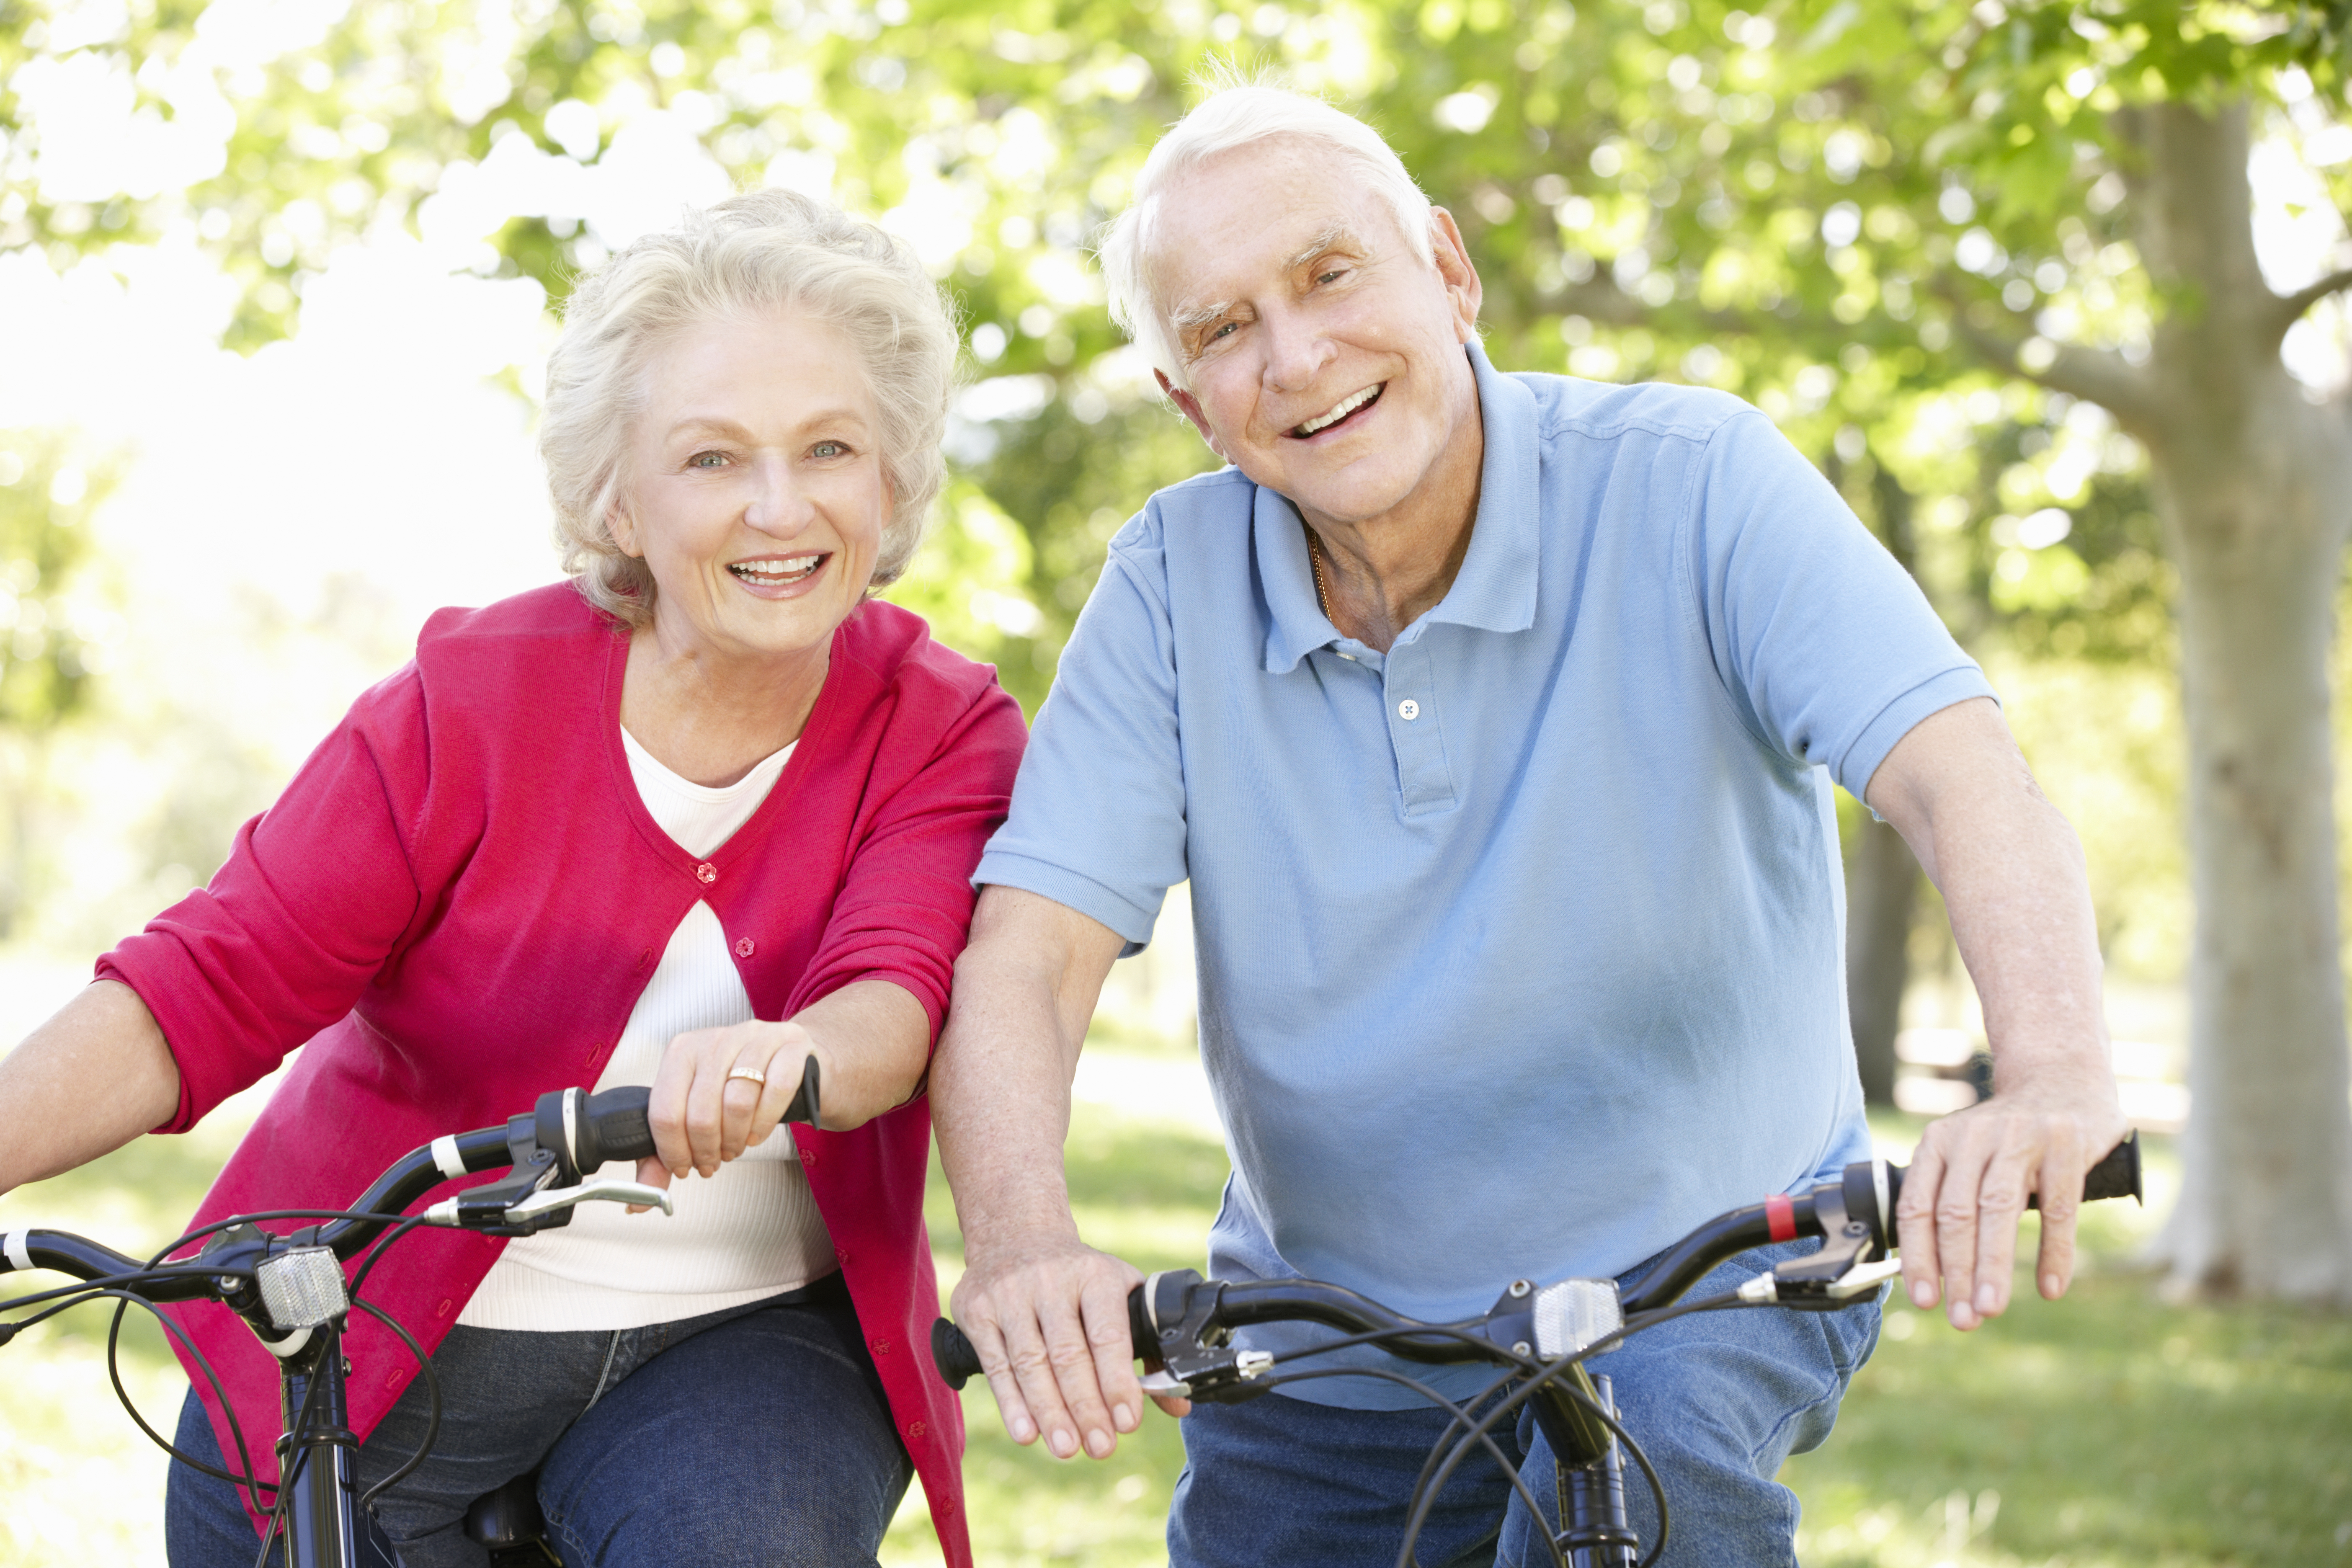 12 Stimulating Activities for Your Loved One with Alzheimer’s